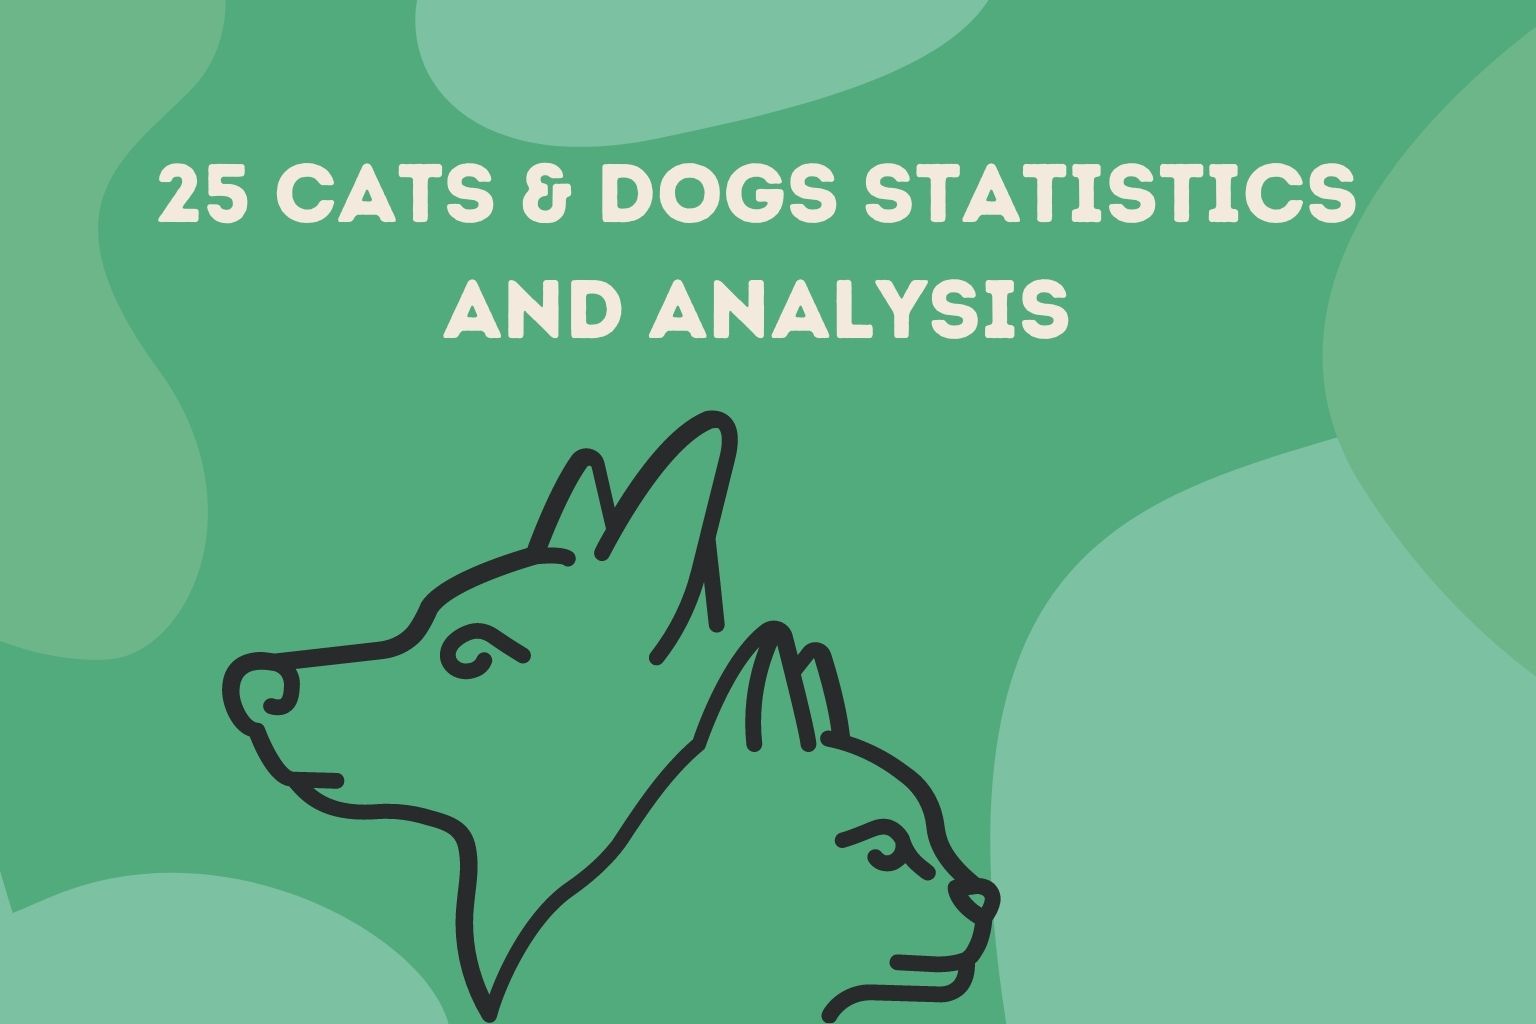 25 Cats & Dogs Statistics and Analysis